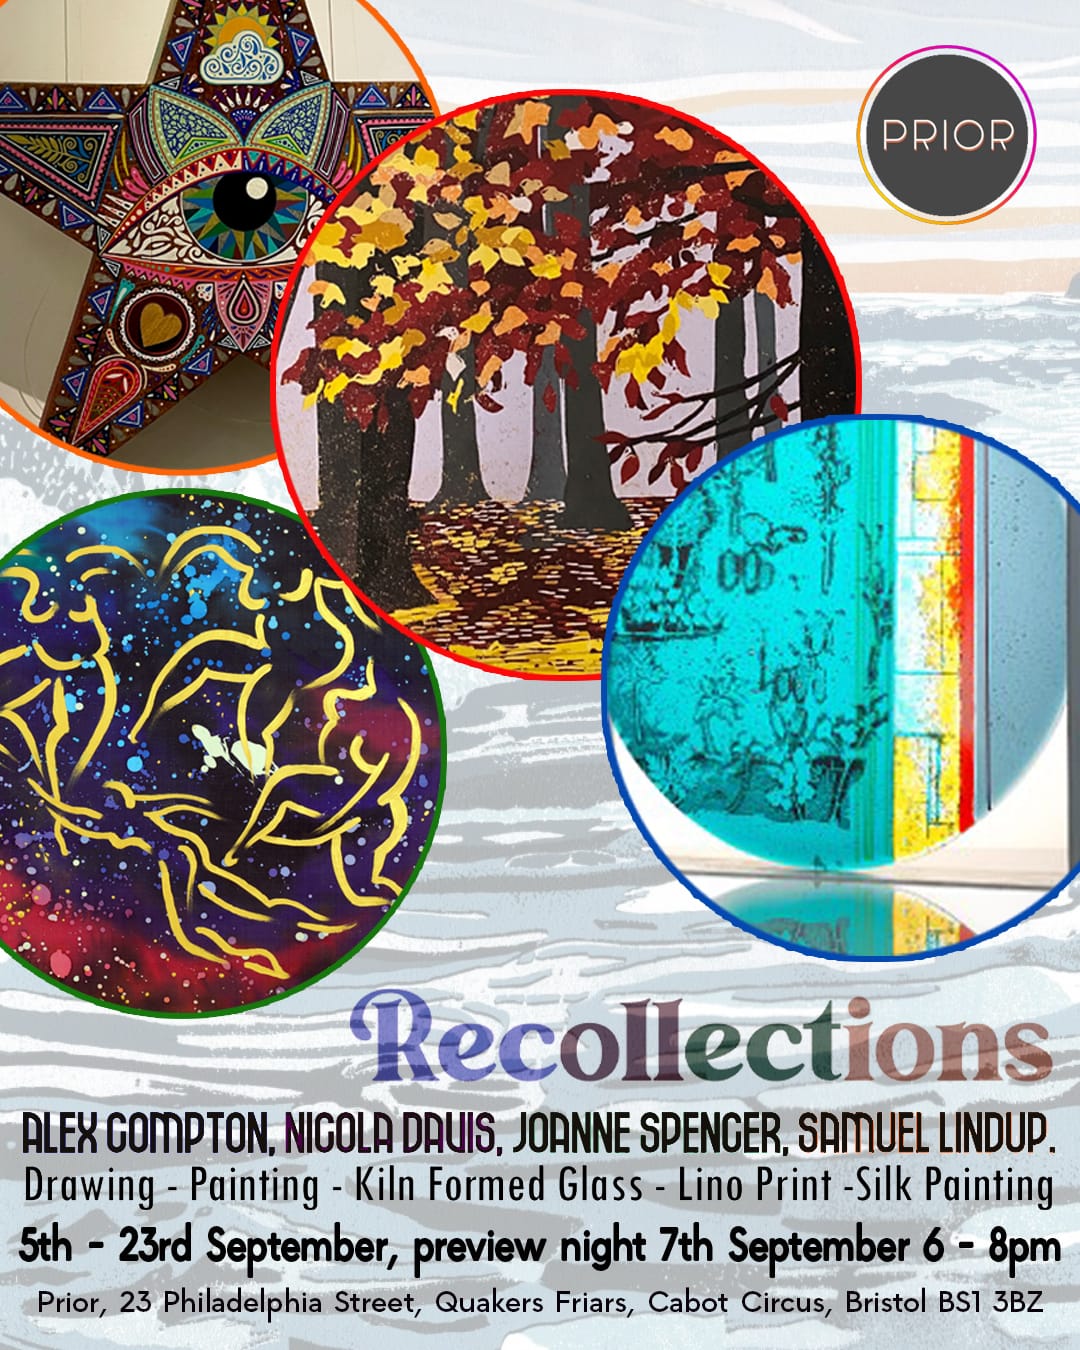 Recollections: Art collective Exhibition | Monday 4th September - Sunday 24th September: Opening Evening Thursday 7th September 6pm - 8pm